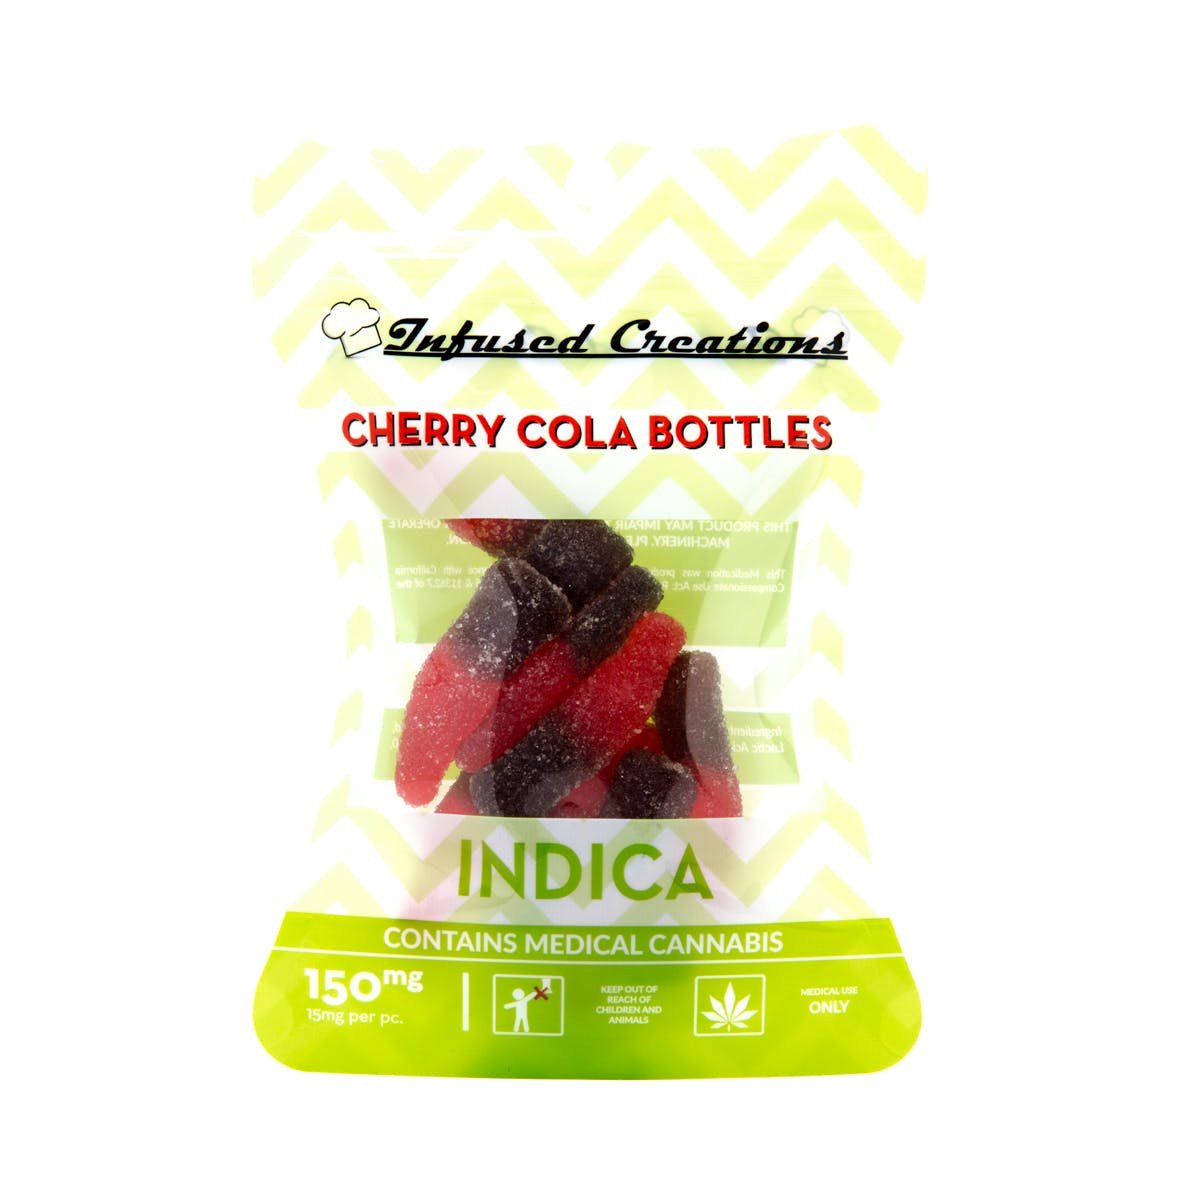 Cherry Cola bottles Indica, 150mg